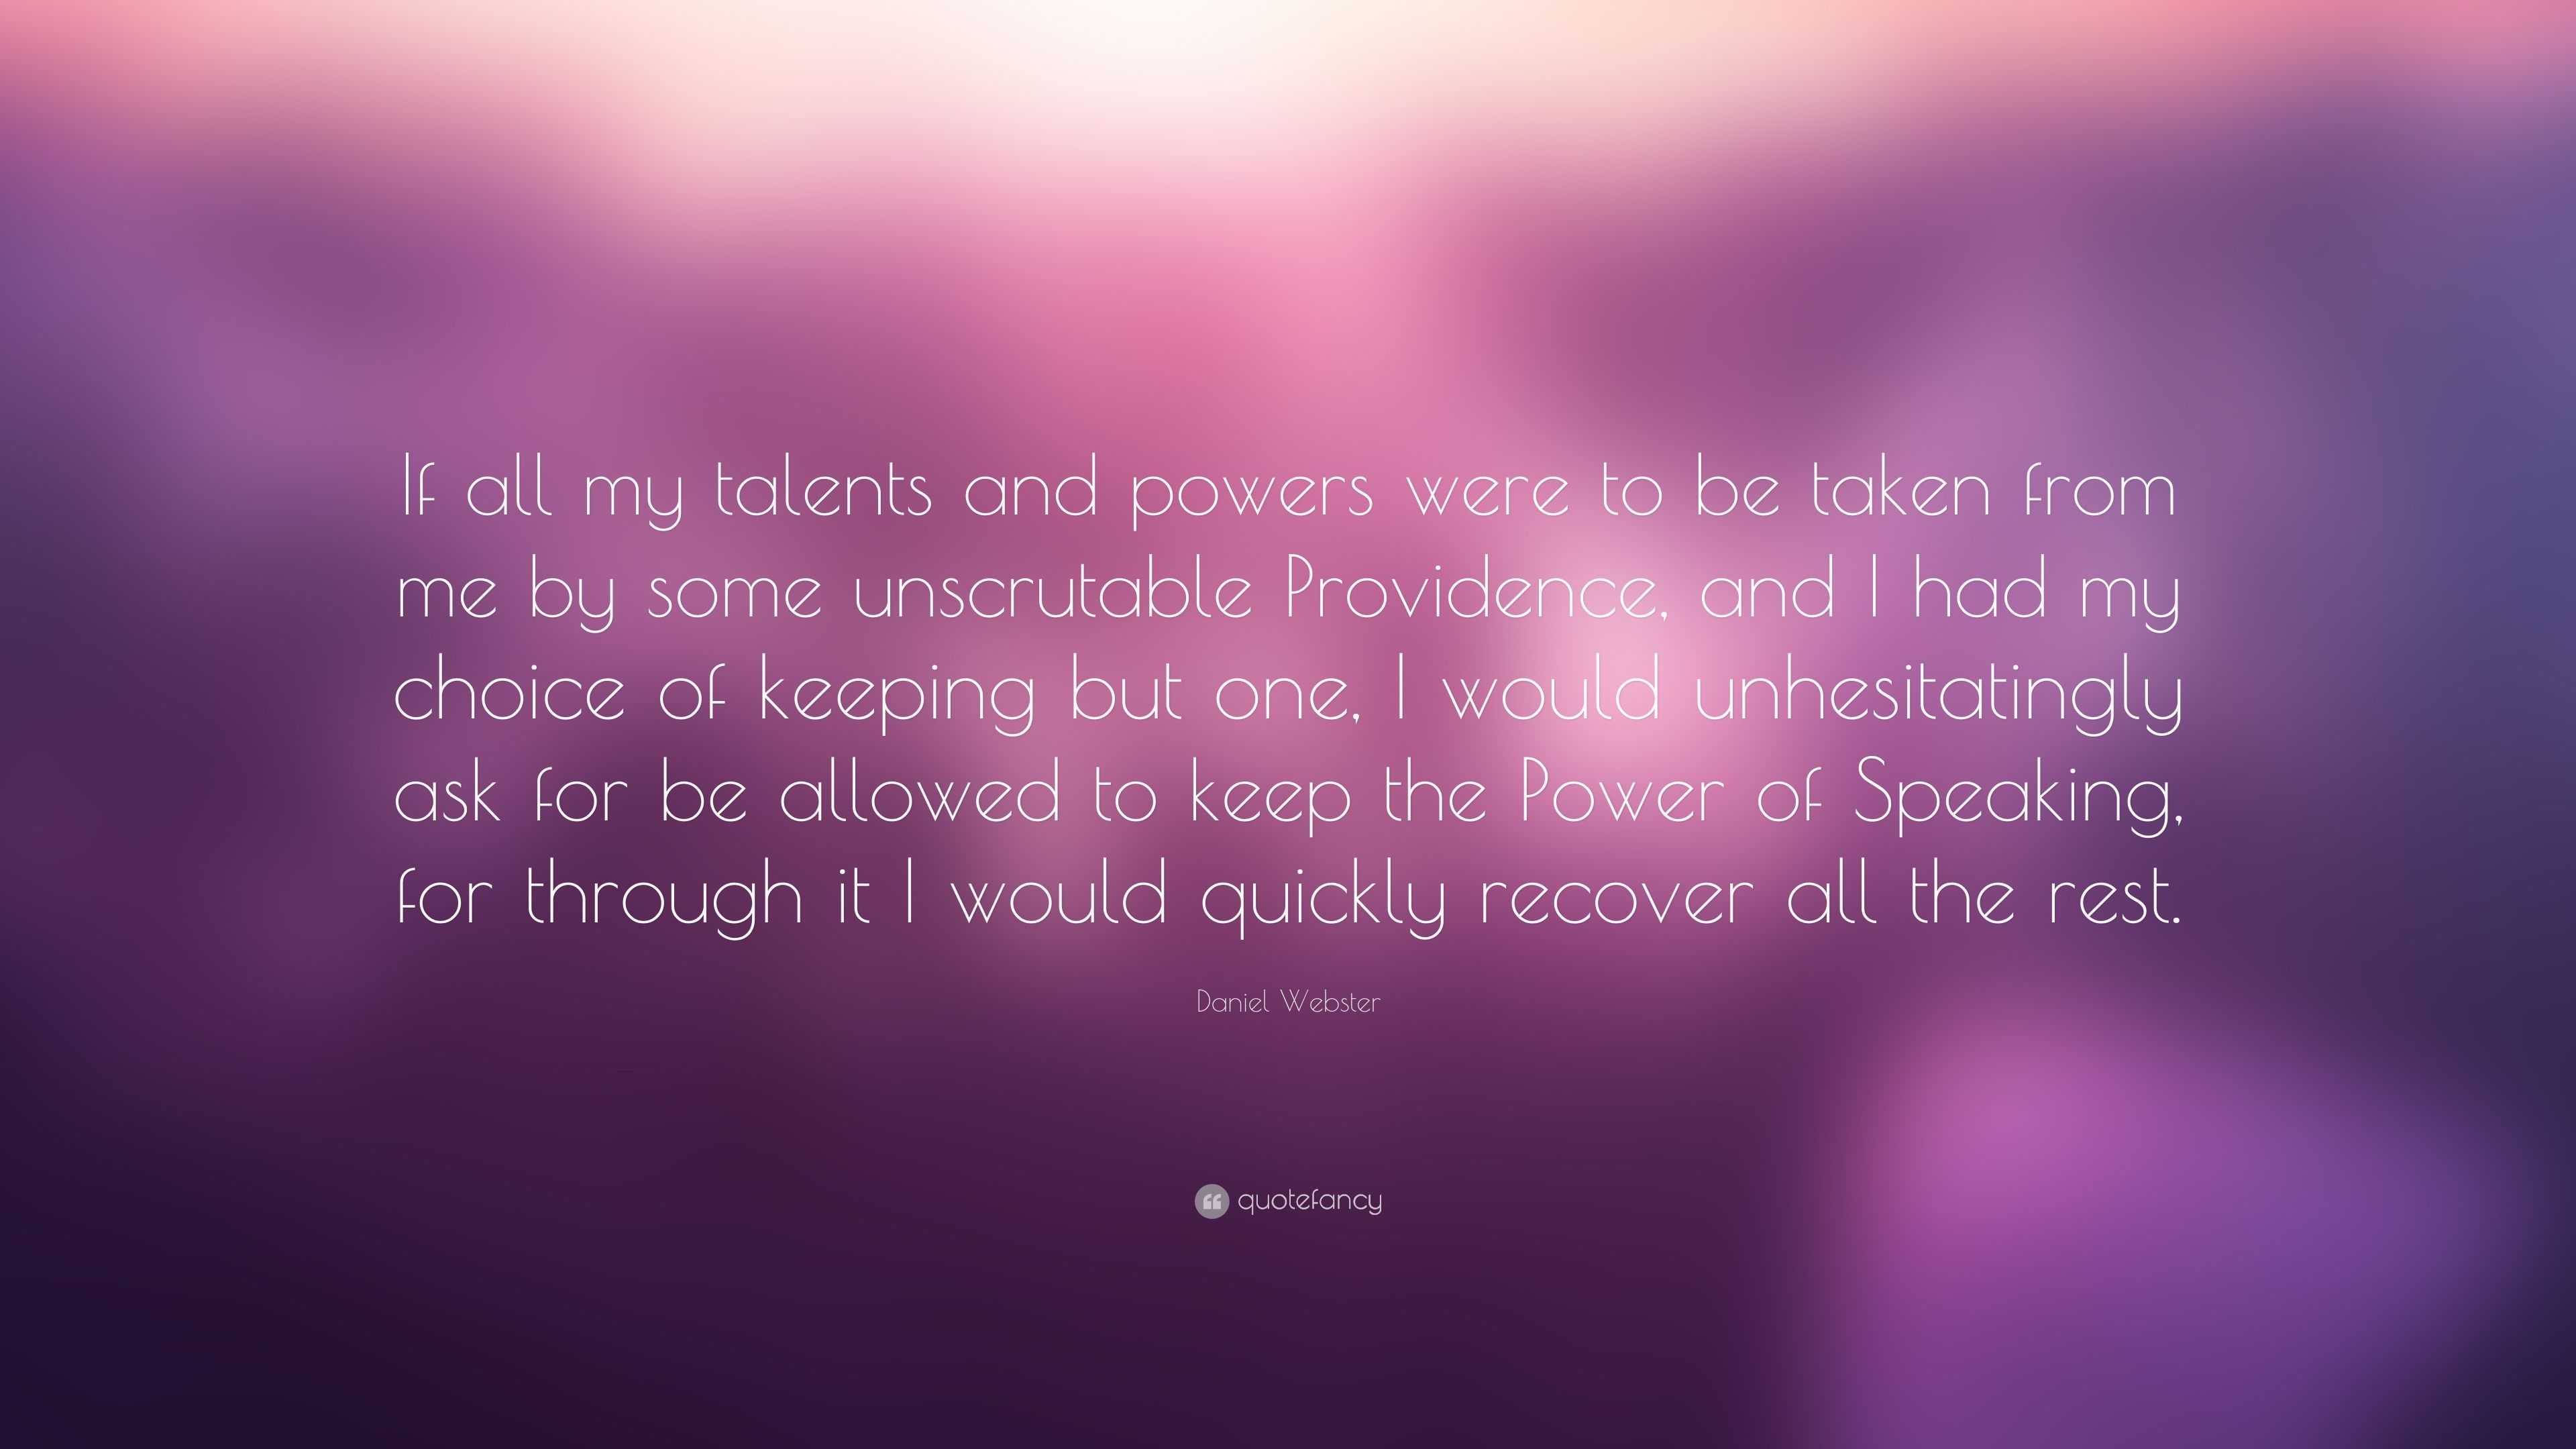 Daniel Webster Quote: “If all my talents and powers were to be taken ...